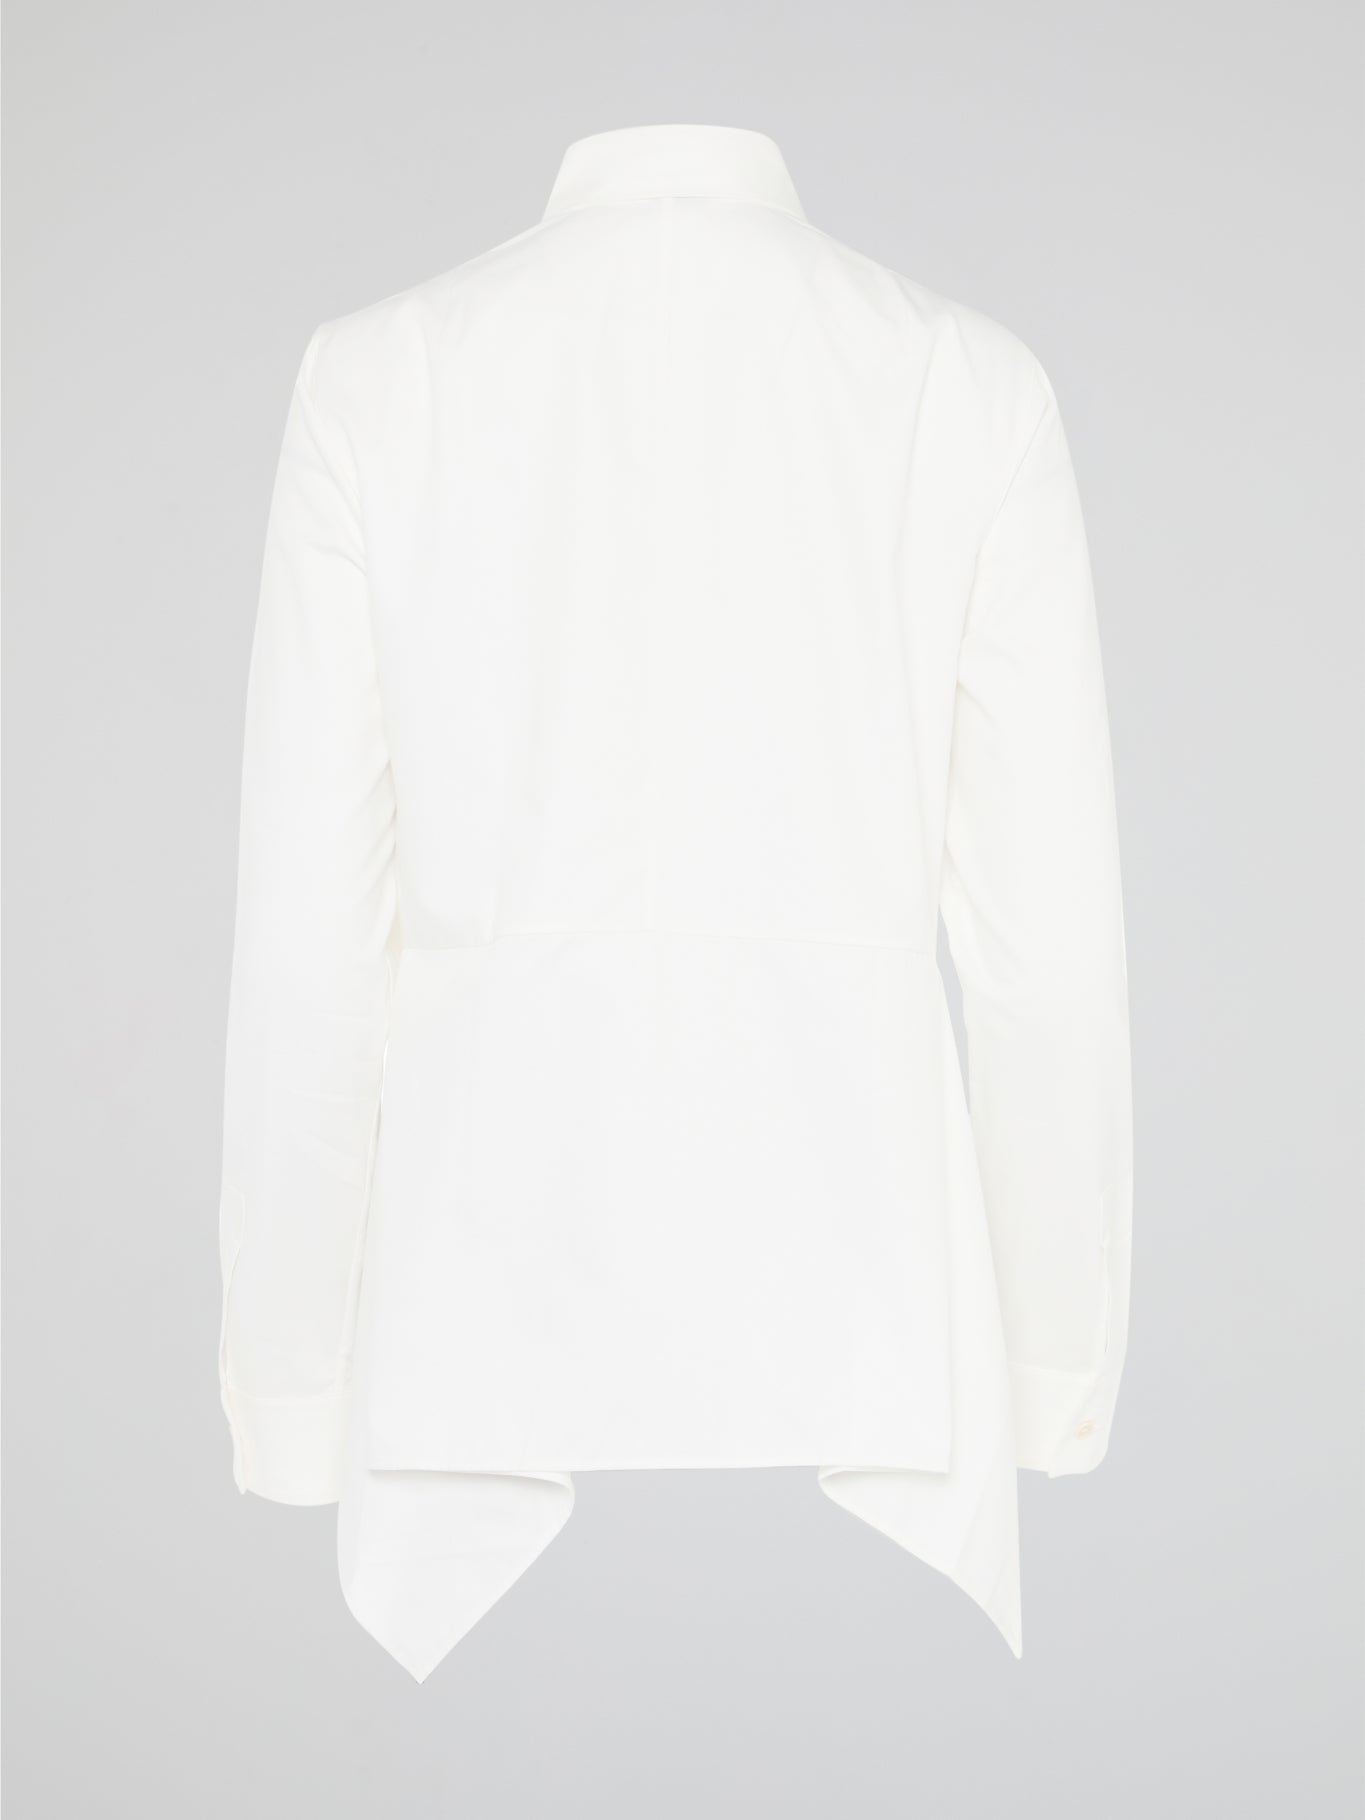 Turn heads and make a statement with the White High-Low Shirt from Akris Punto. Crafted with impeccable attention to detail, this modern twist on a classic silhouette is designed to elevate your style game. With its dynamic high-low hemline and luxurious fabric, this shirt is the epitome of effortless sophistication, perfect for any occasion.